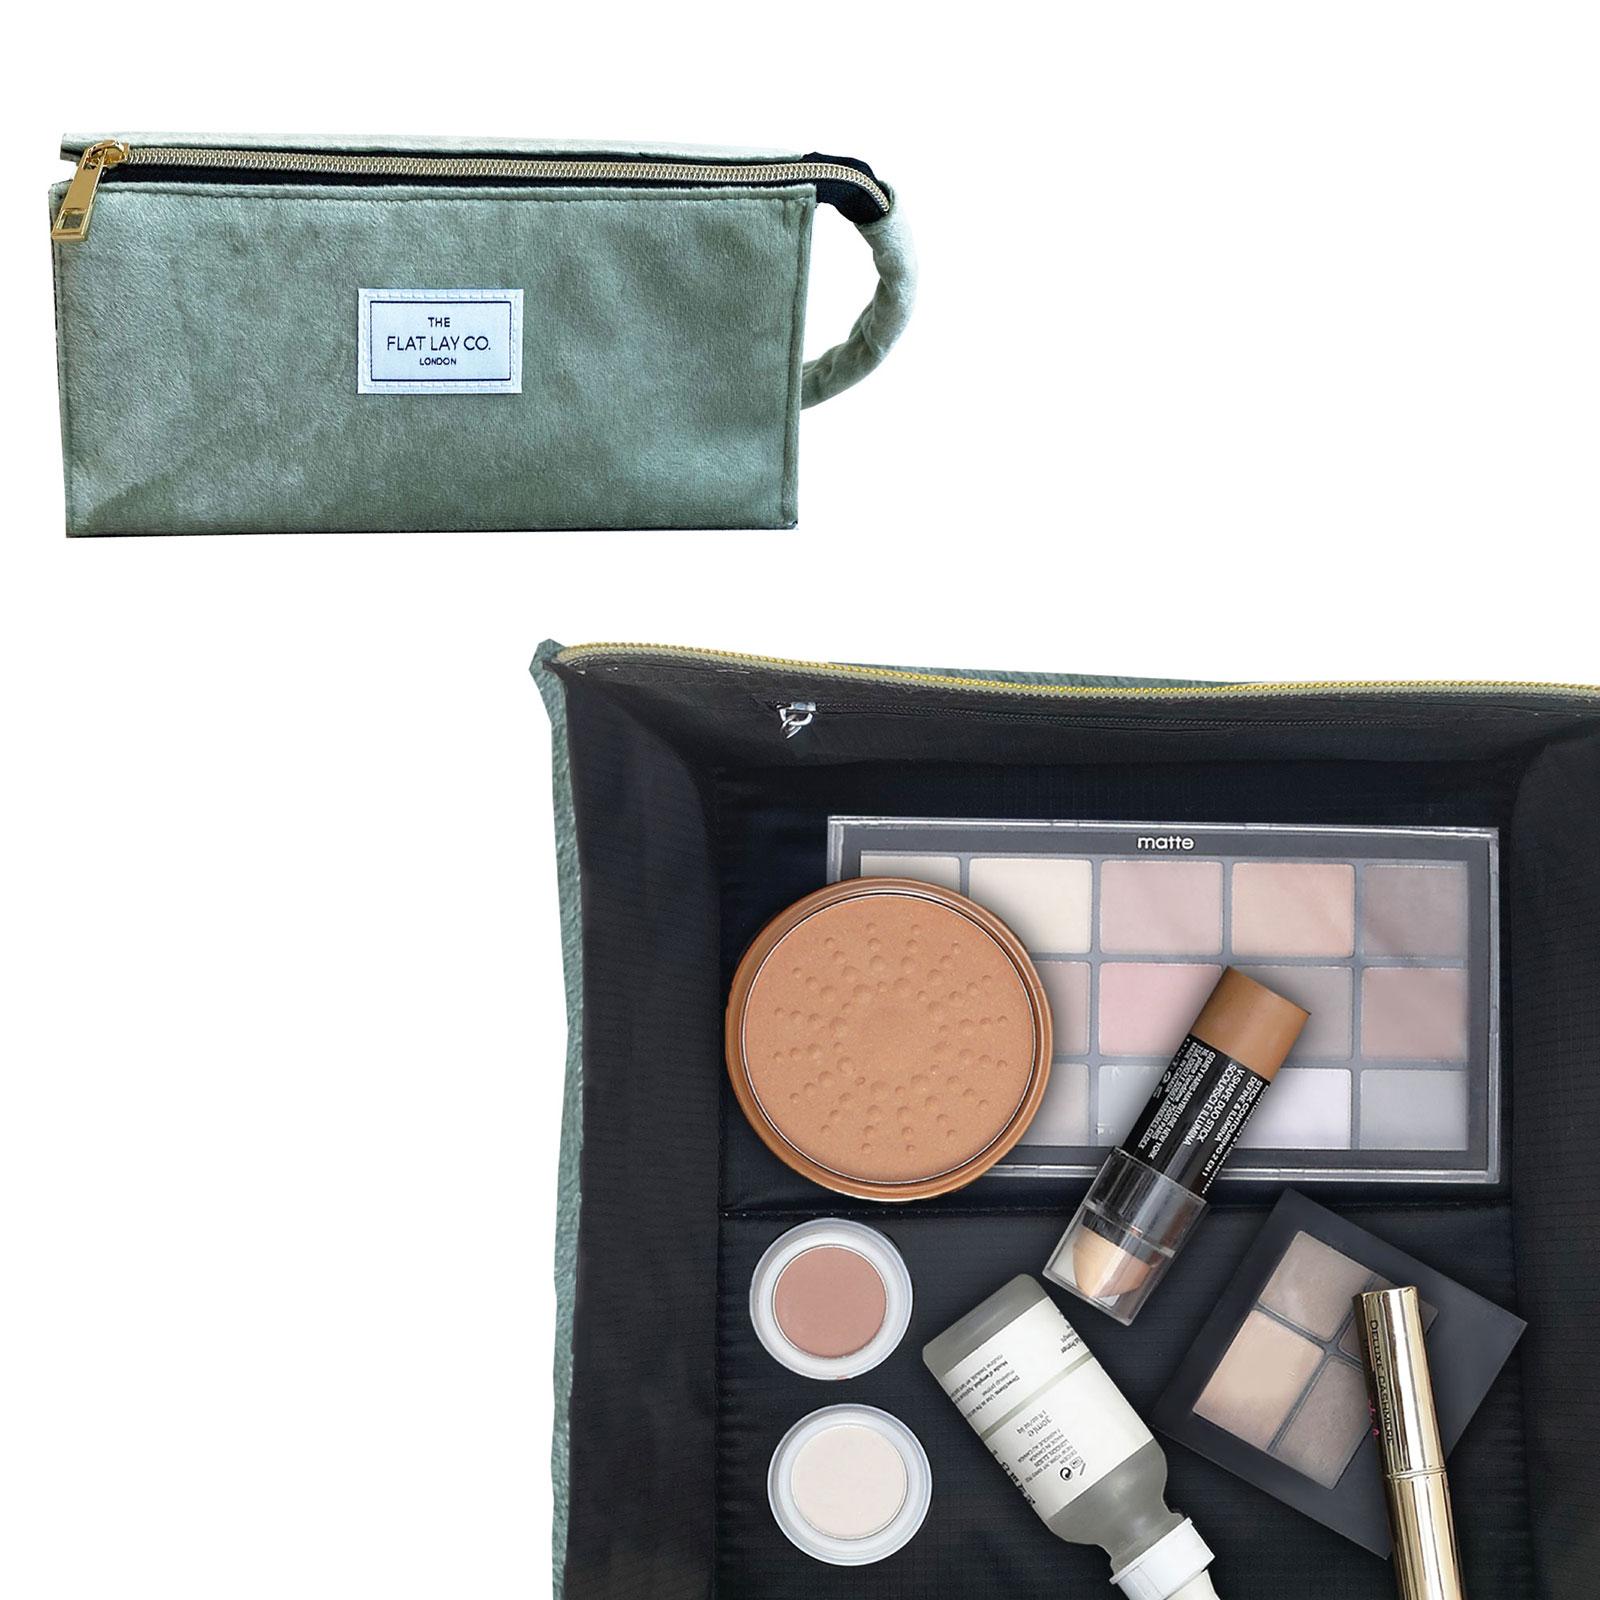 The Flat Lay Co. Open Flat Makeup Box Bag in Sage Green Velvet - Feelunique